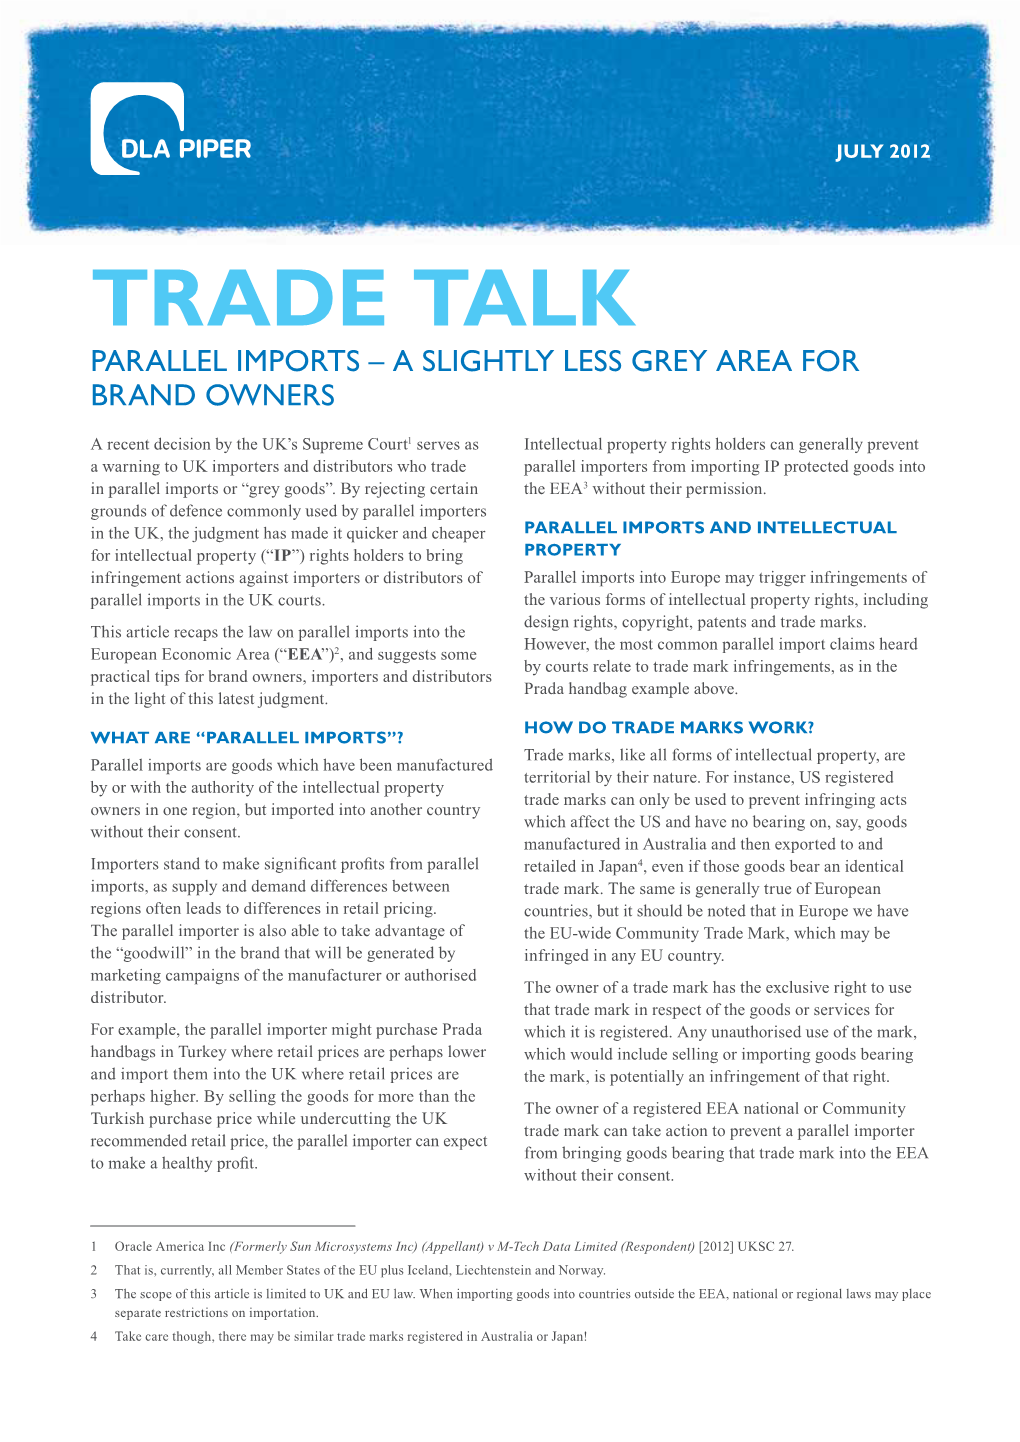 Trade Talk Parallel Imports – a Slightly Less Grey Area for Brand Owners